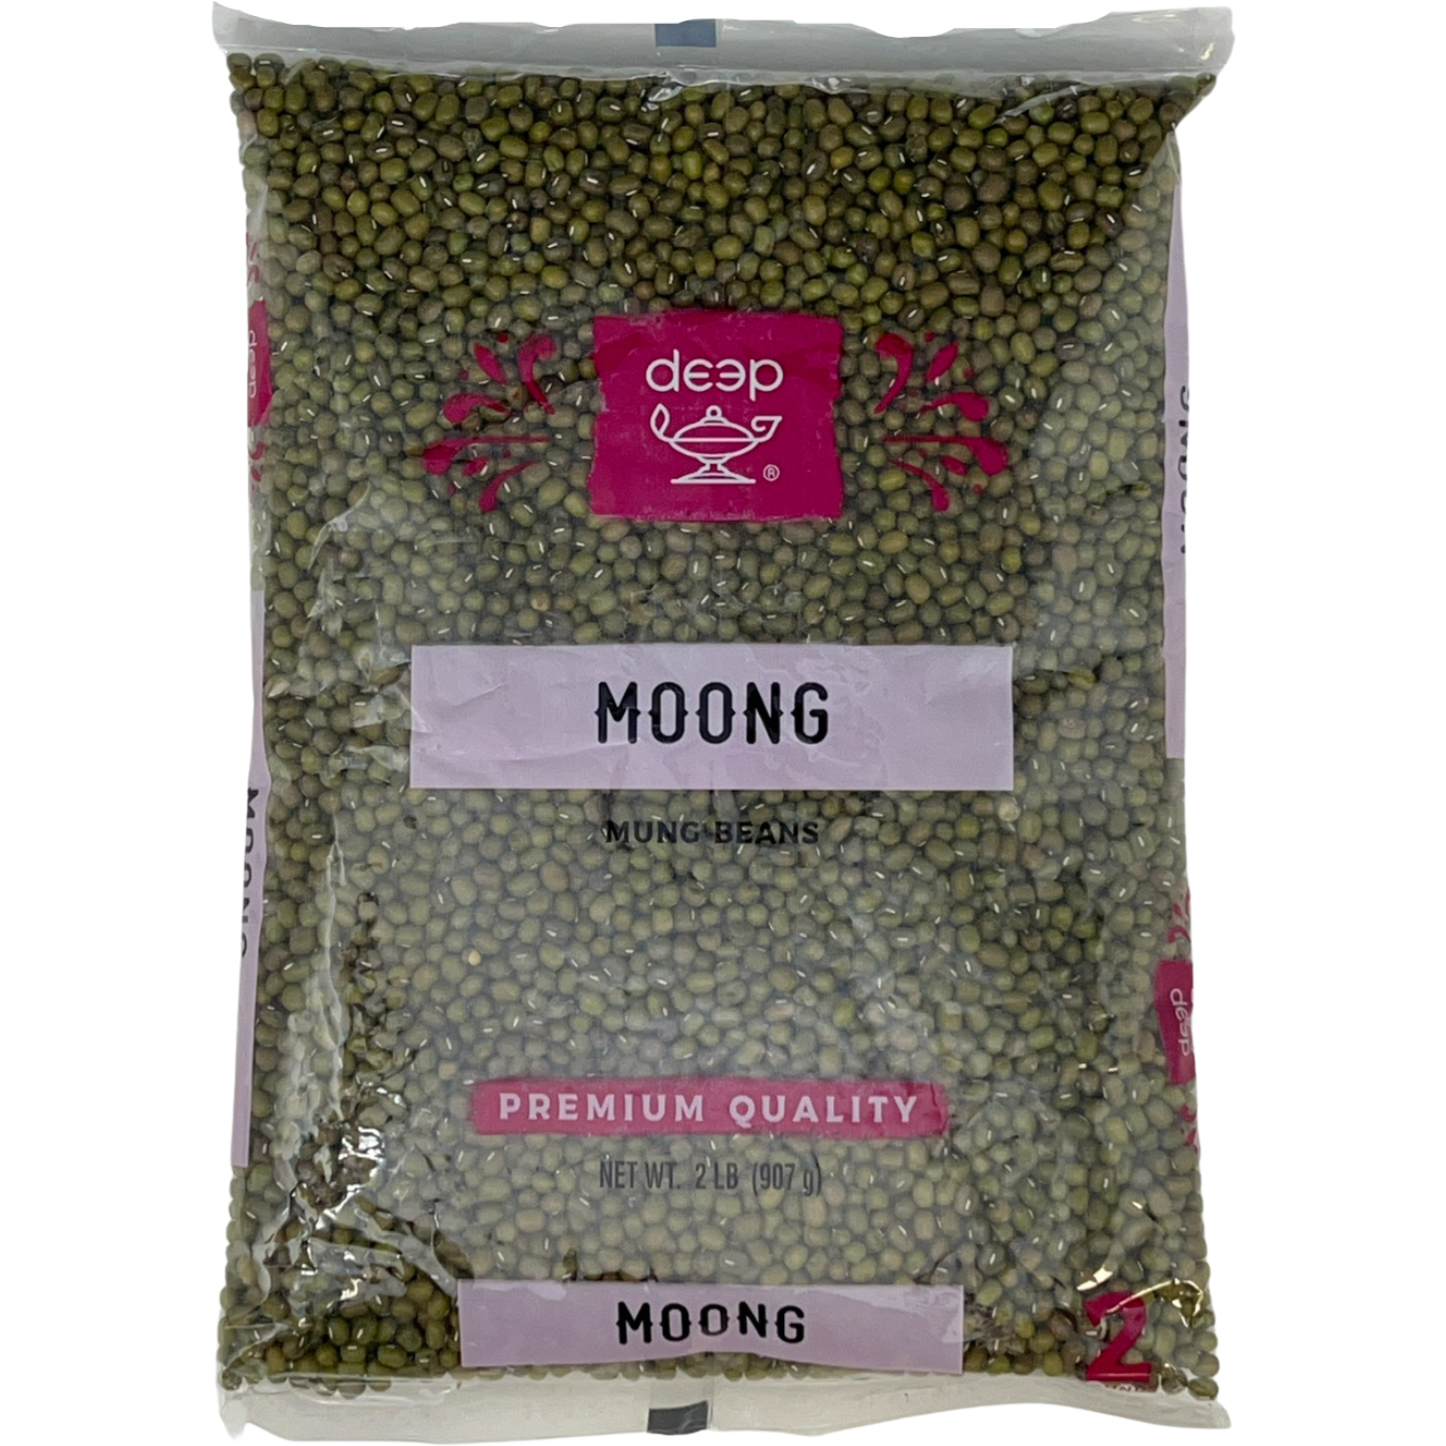 Pack of 5 - Deep Green Moong Dal Whole- 2 Lb (907 Gm)